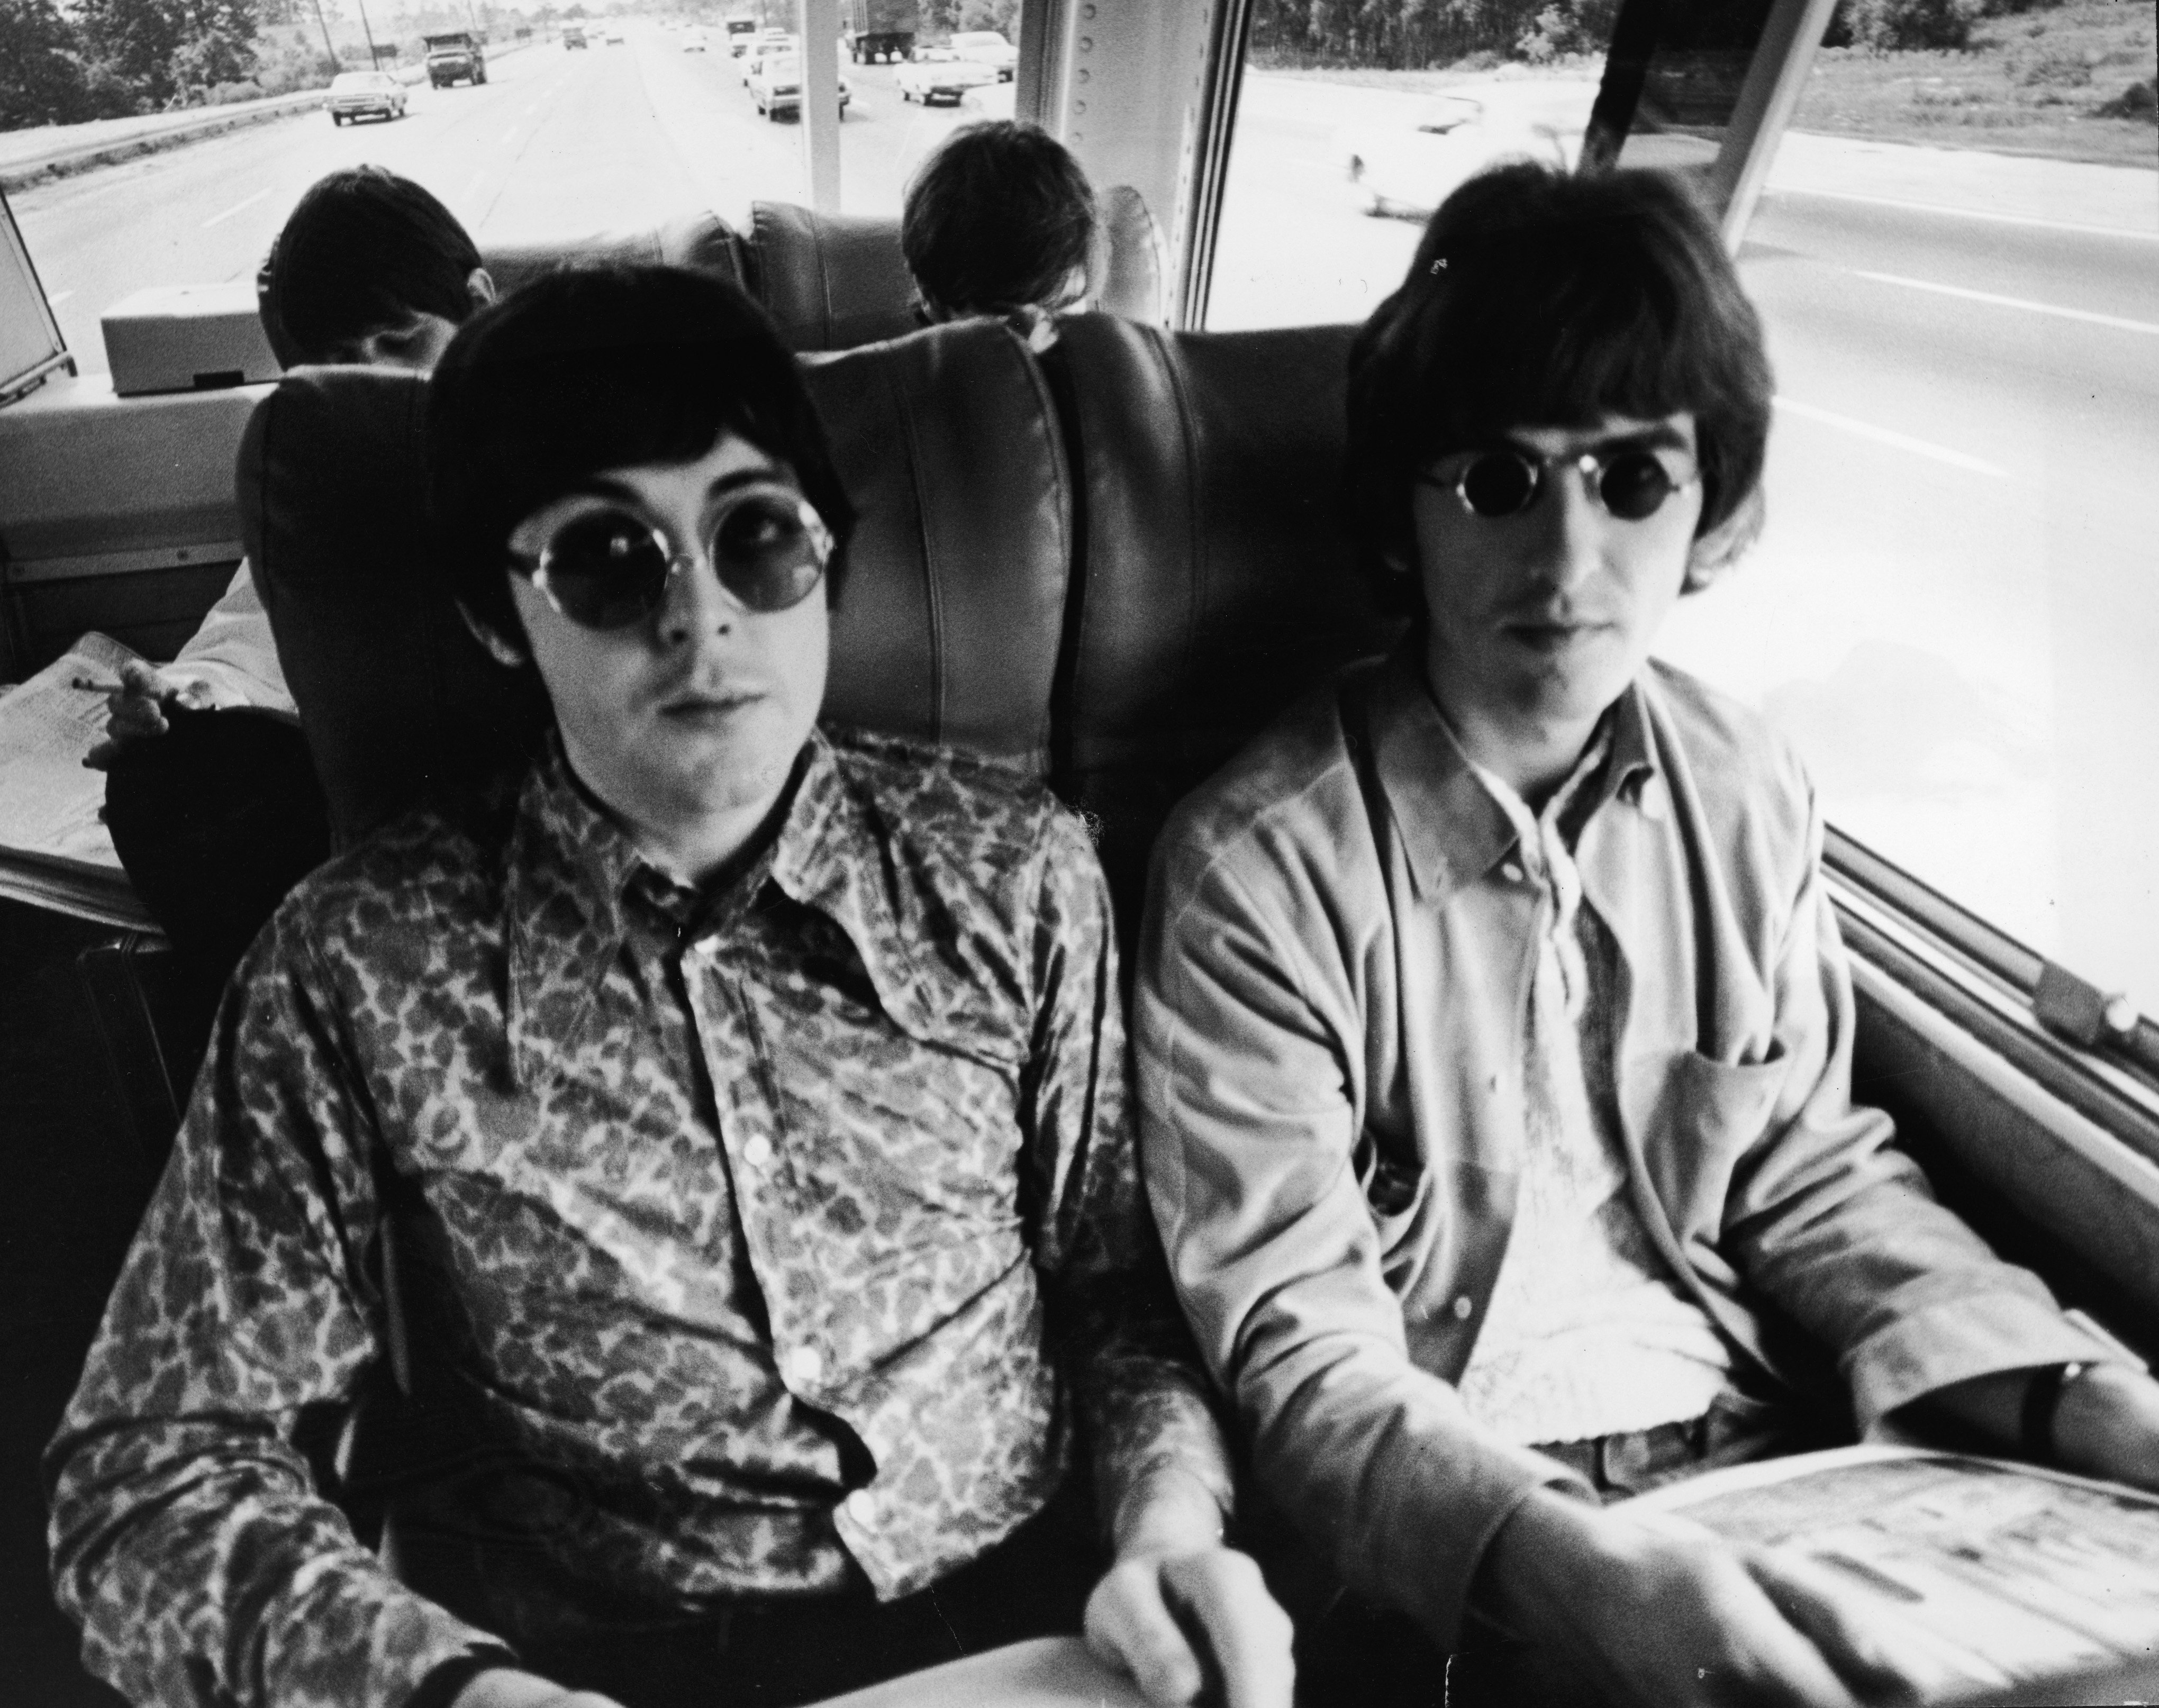 "My Love" singer Paul McCartney wearing sunglasses and sitting next to George Harrison